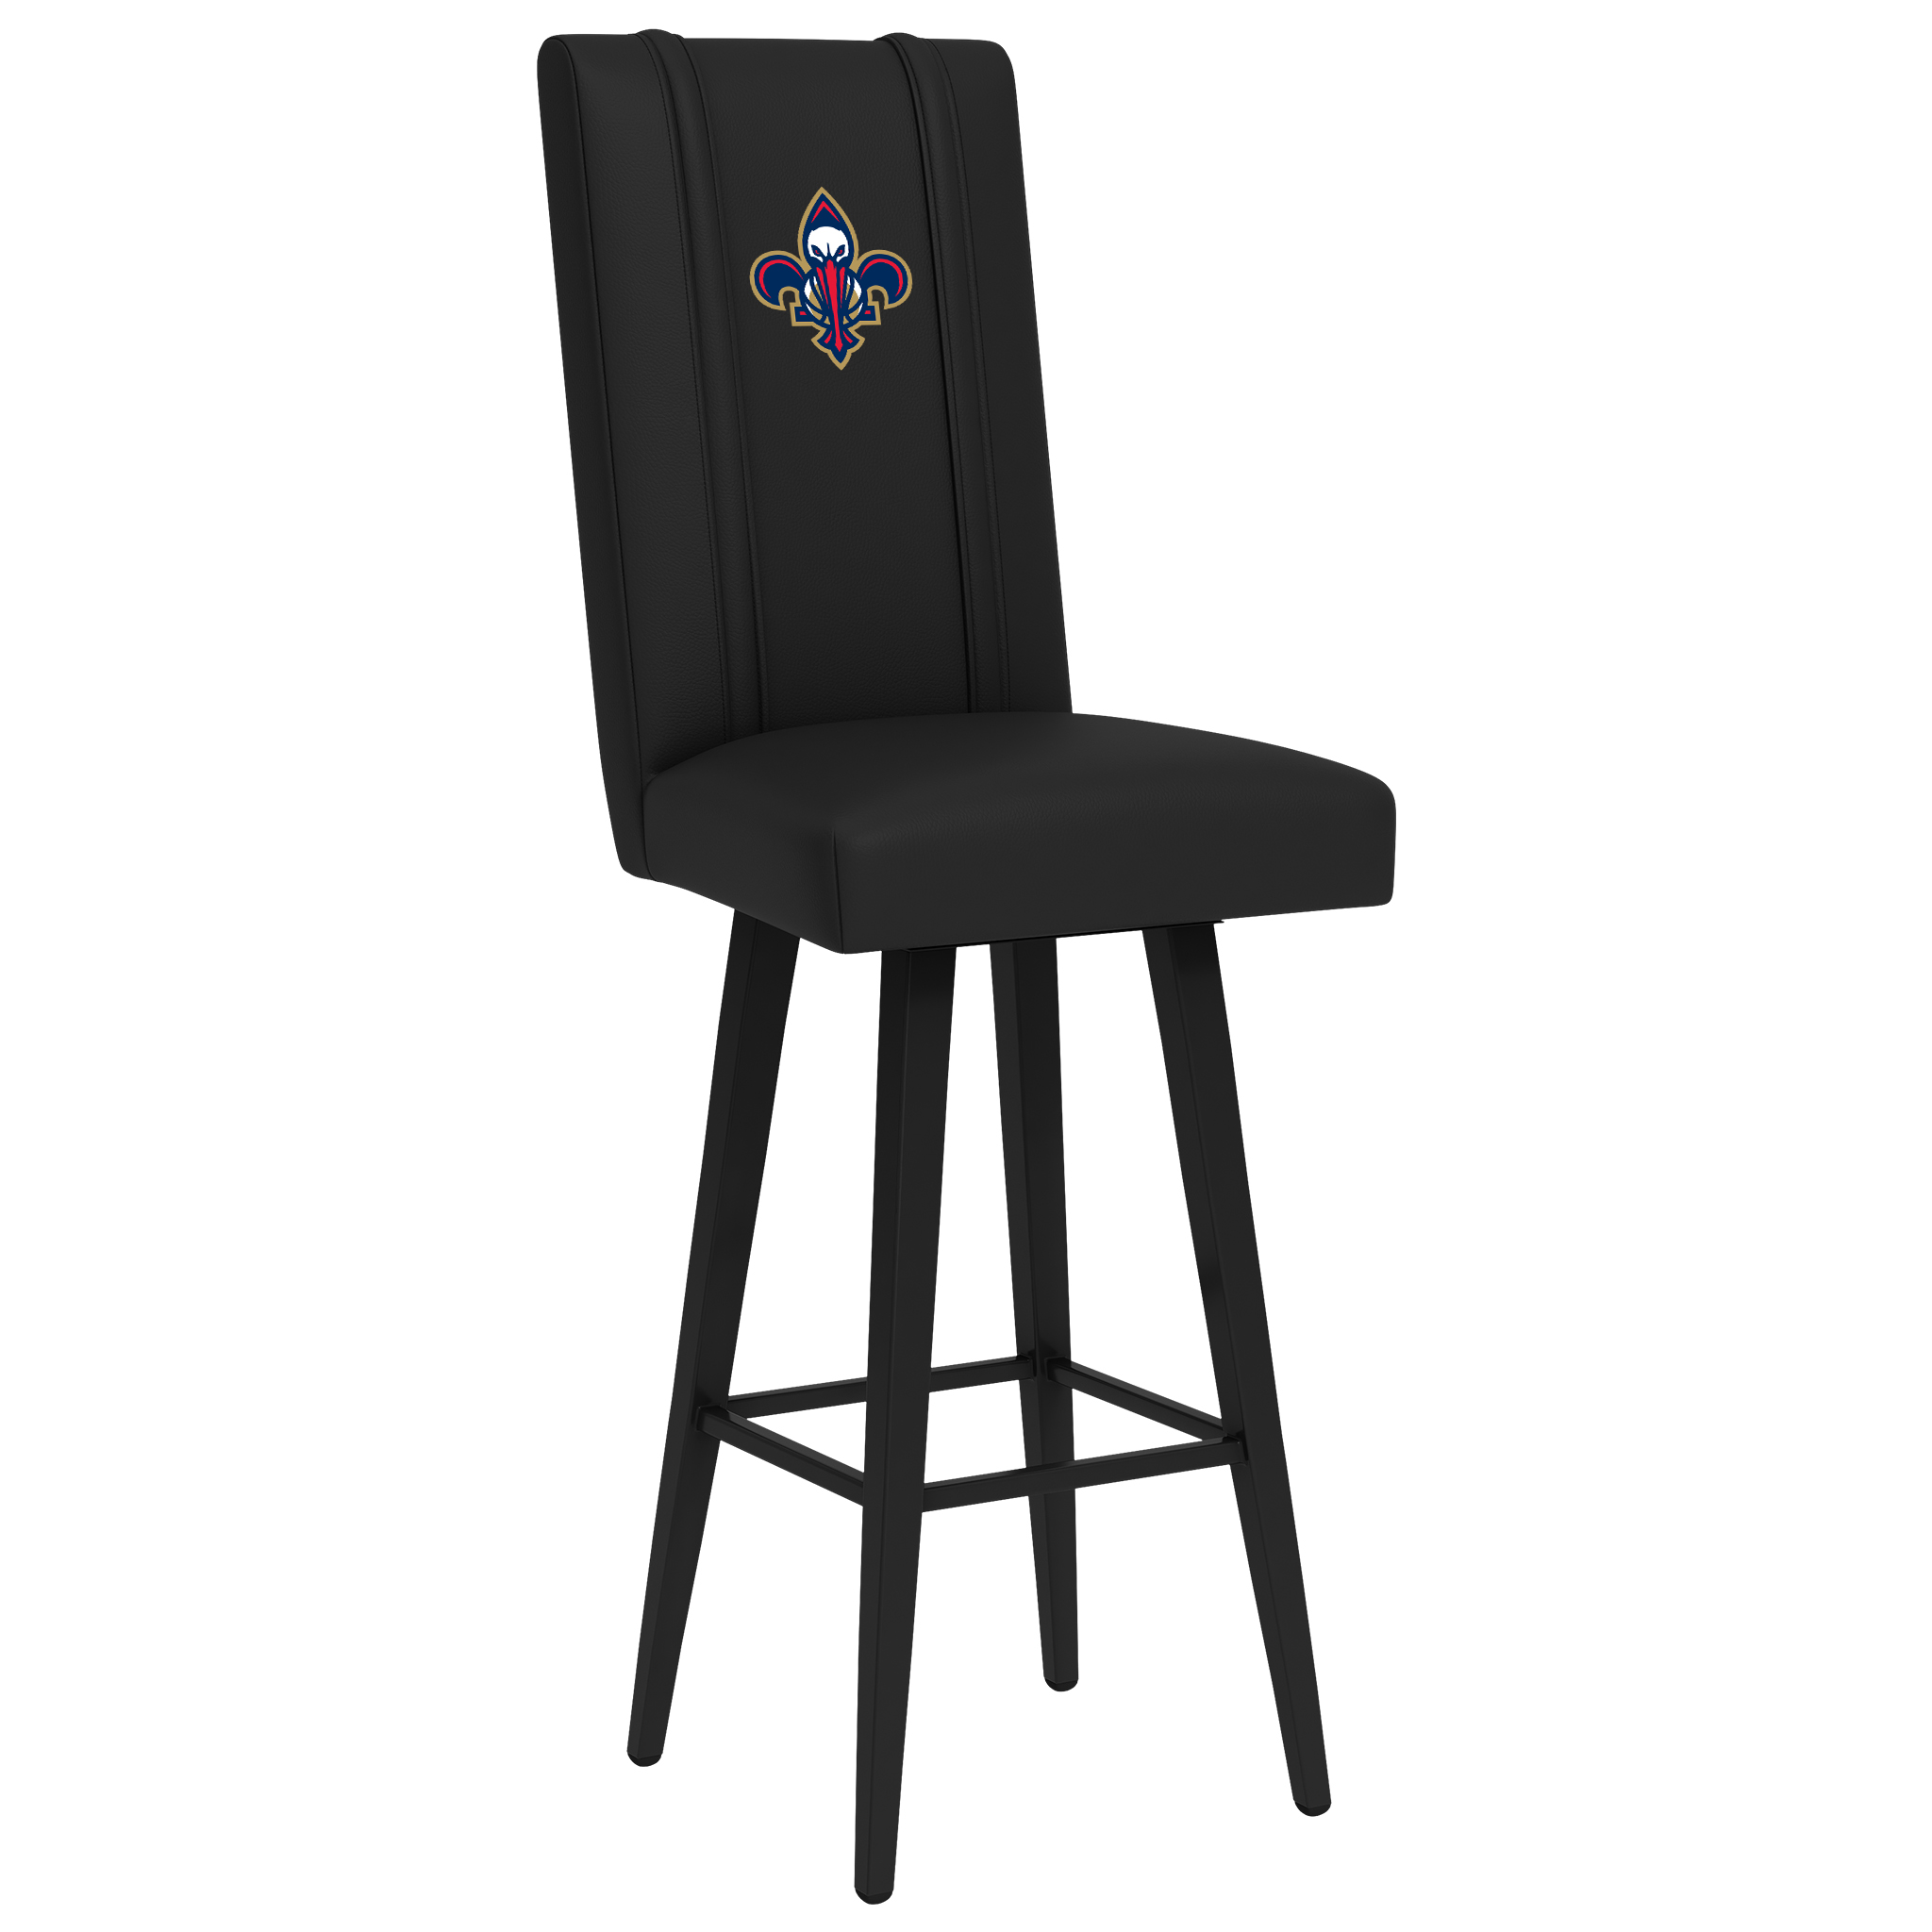 New Orleans Pelicans Swivel Bar Stool 2000 With New Orleans Pelicans Secondary